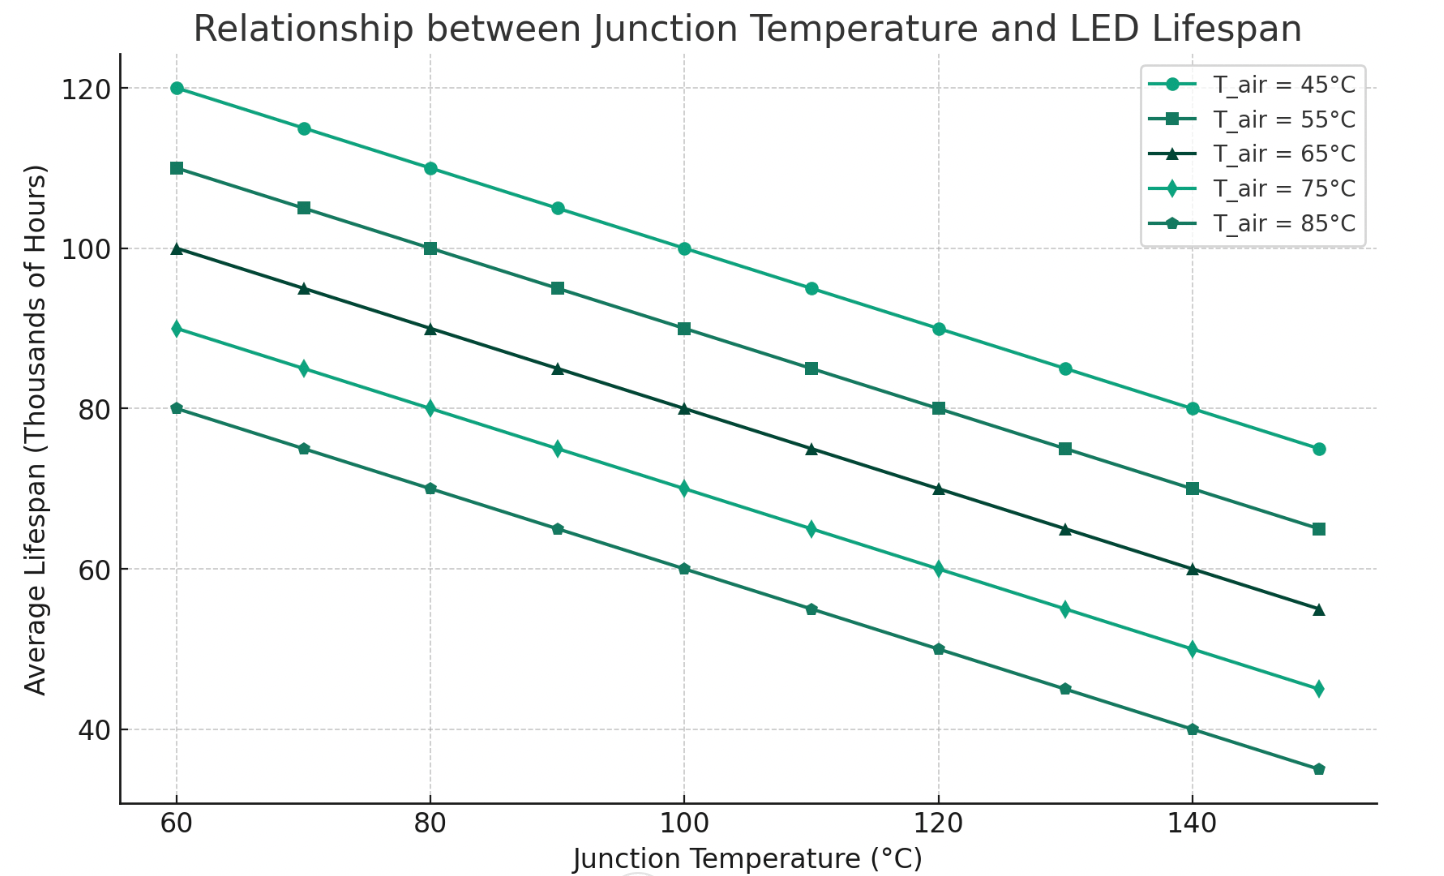 relationship between the junction temperature of LEDs and their average lifespan